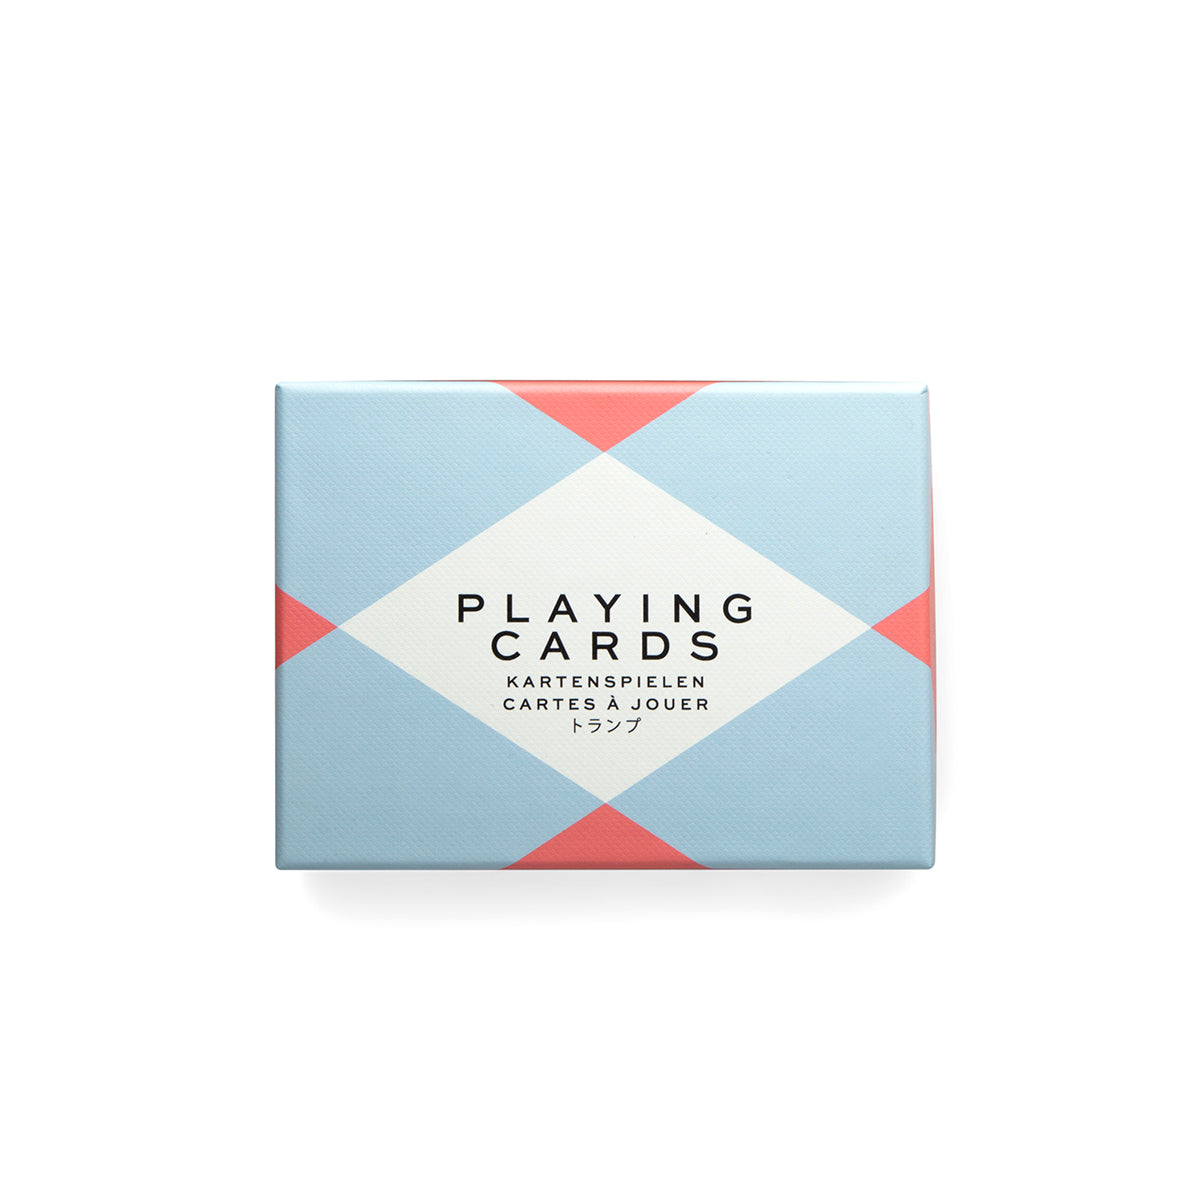 Double Playing Cards by Printworks